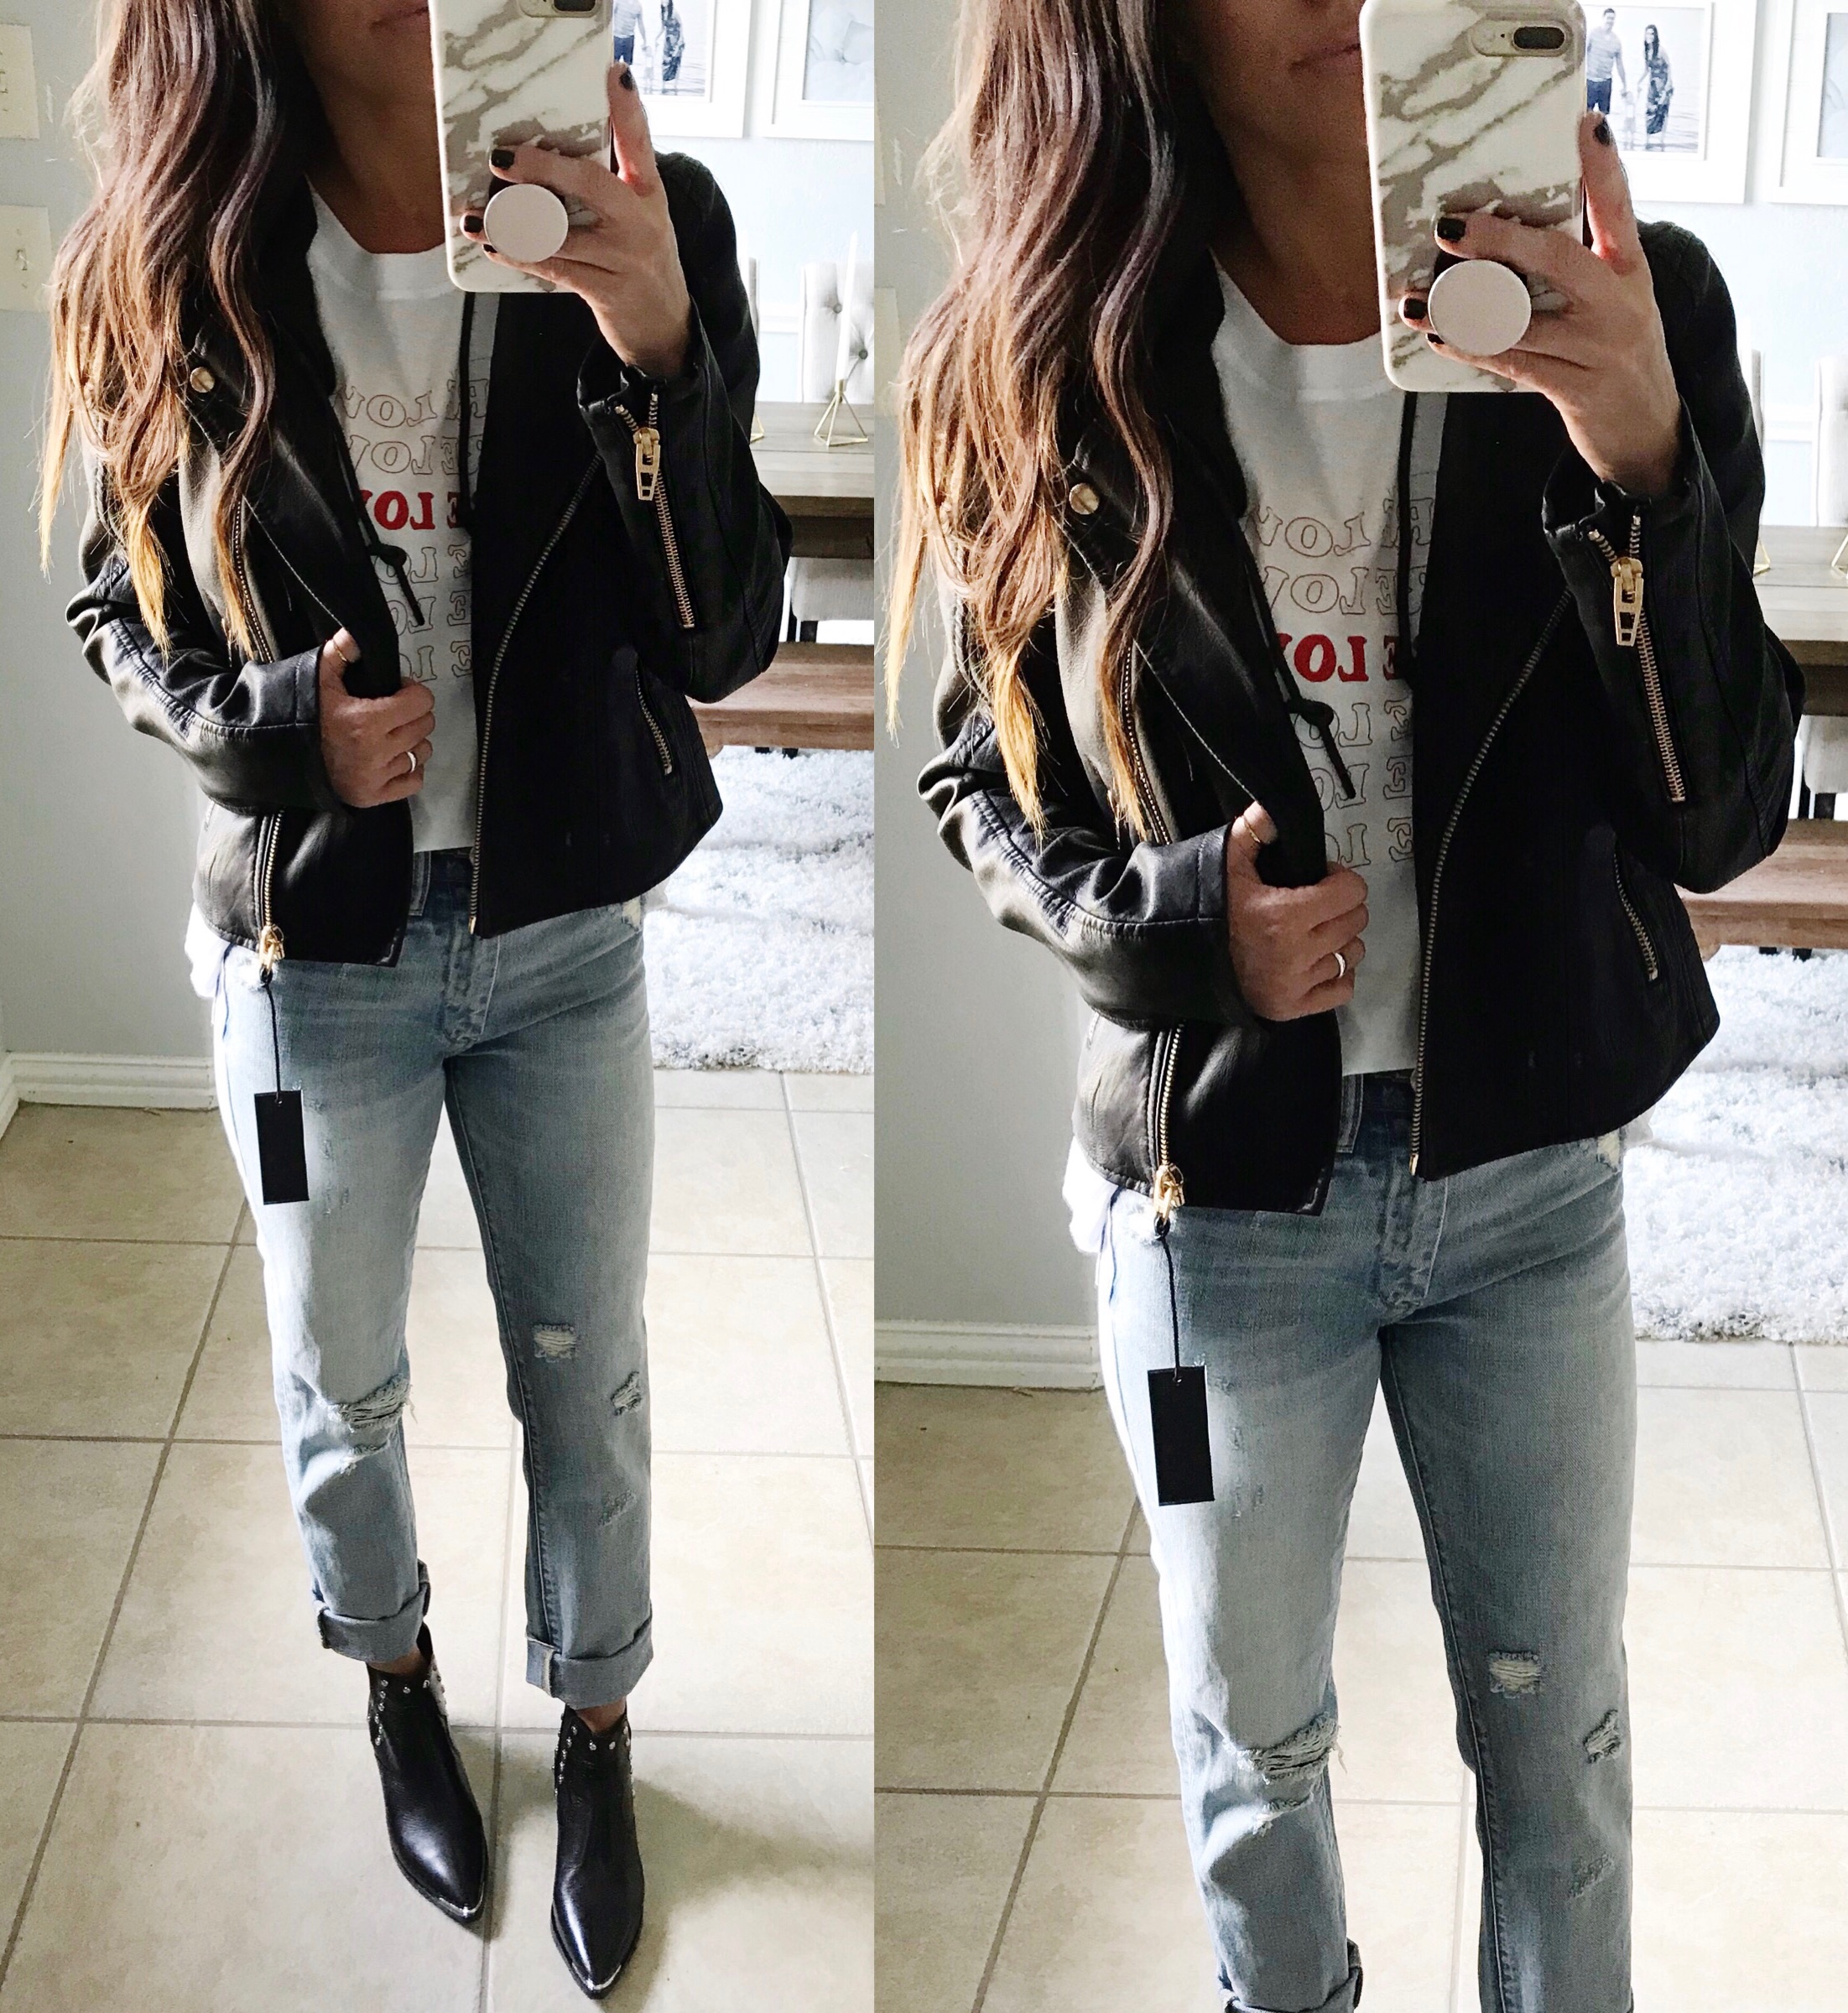 Moto Jacket and jeans